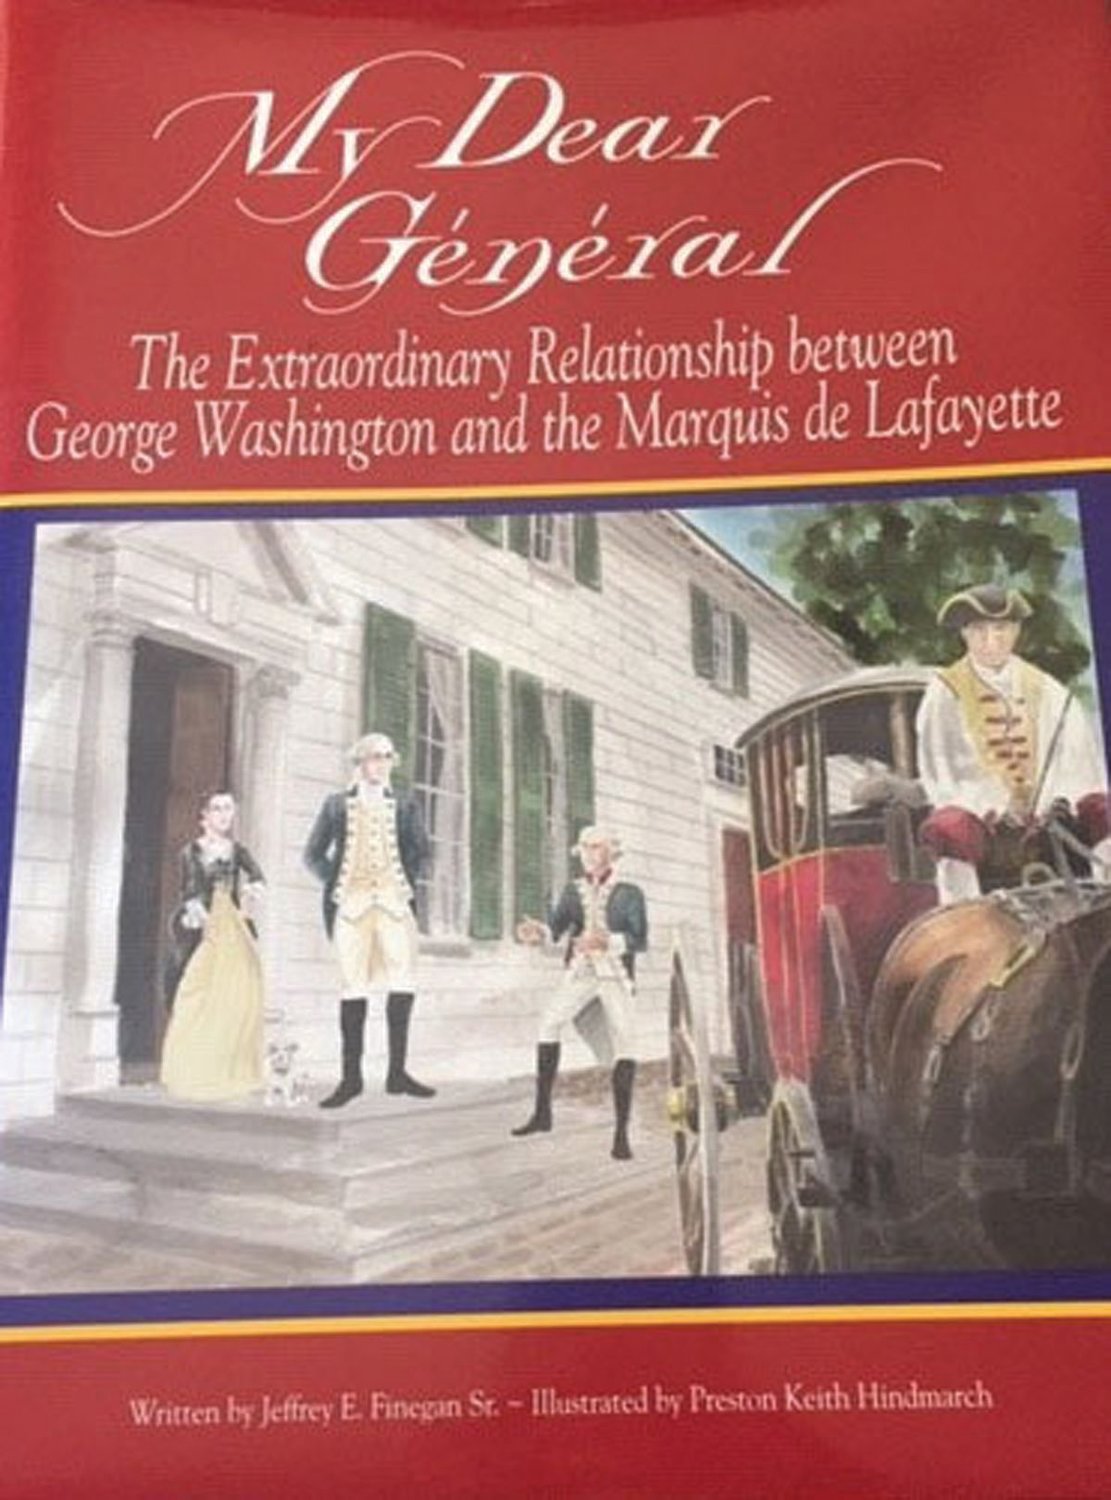 The third book in the series covers the father/son relationship forged by George Washington and the young Lafayette.